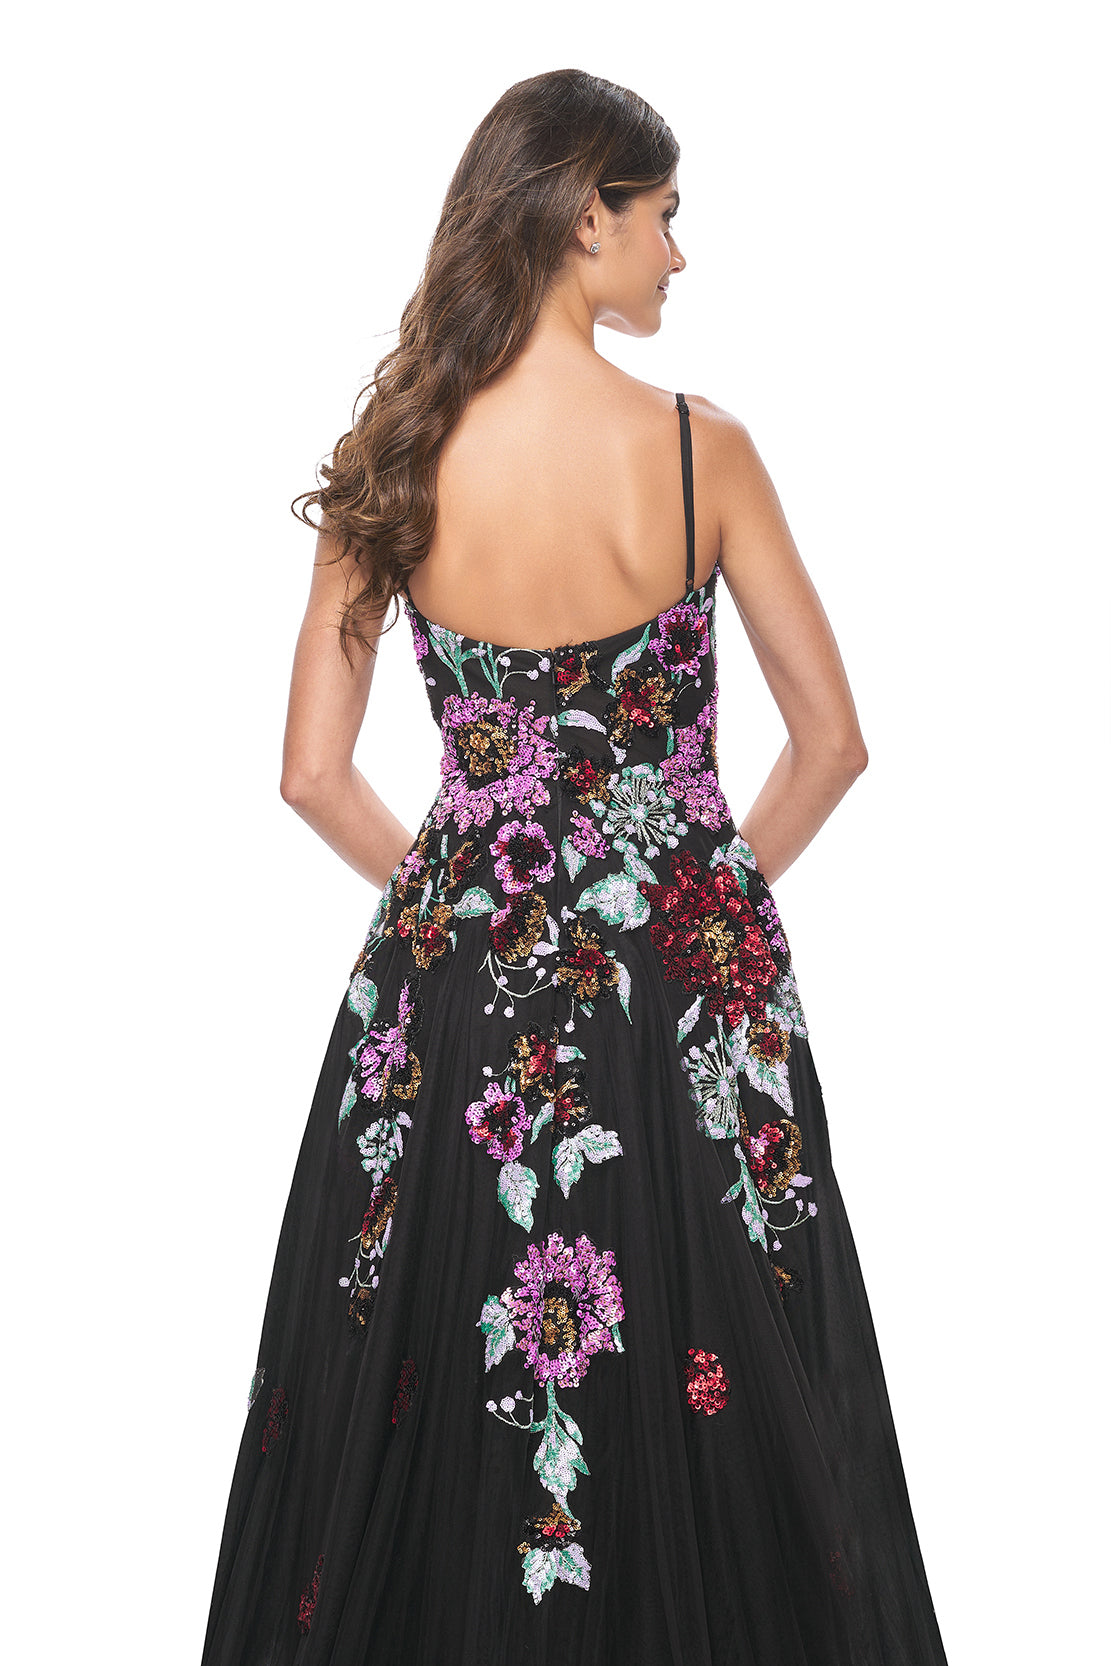 La Femme 32019 A-Line Gown with Multi-Color Floral Sequin Applique - A graceful A-line gown featuring delicate tulle, horsehair hem, and enchanting multi-color floral sequin applique. Perfect for proms and formal evening events.